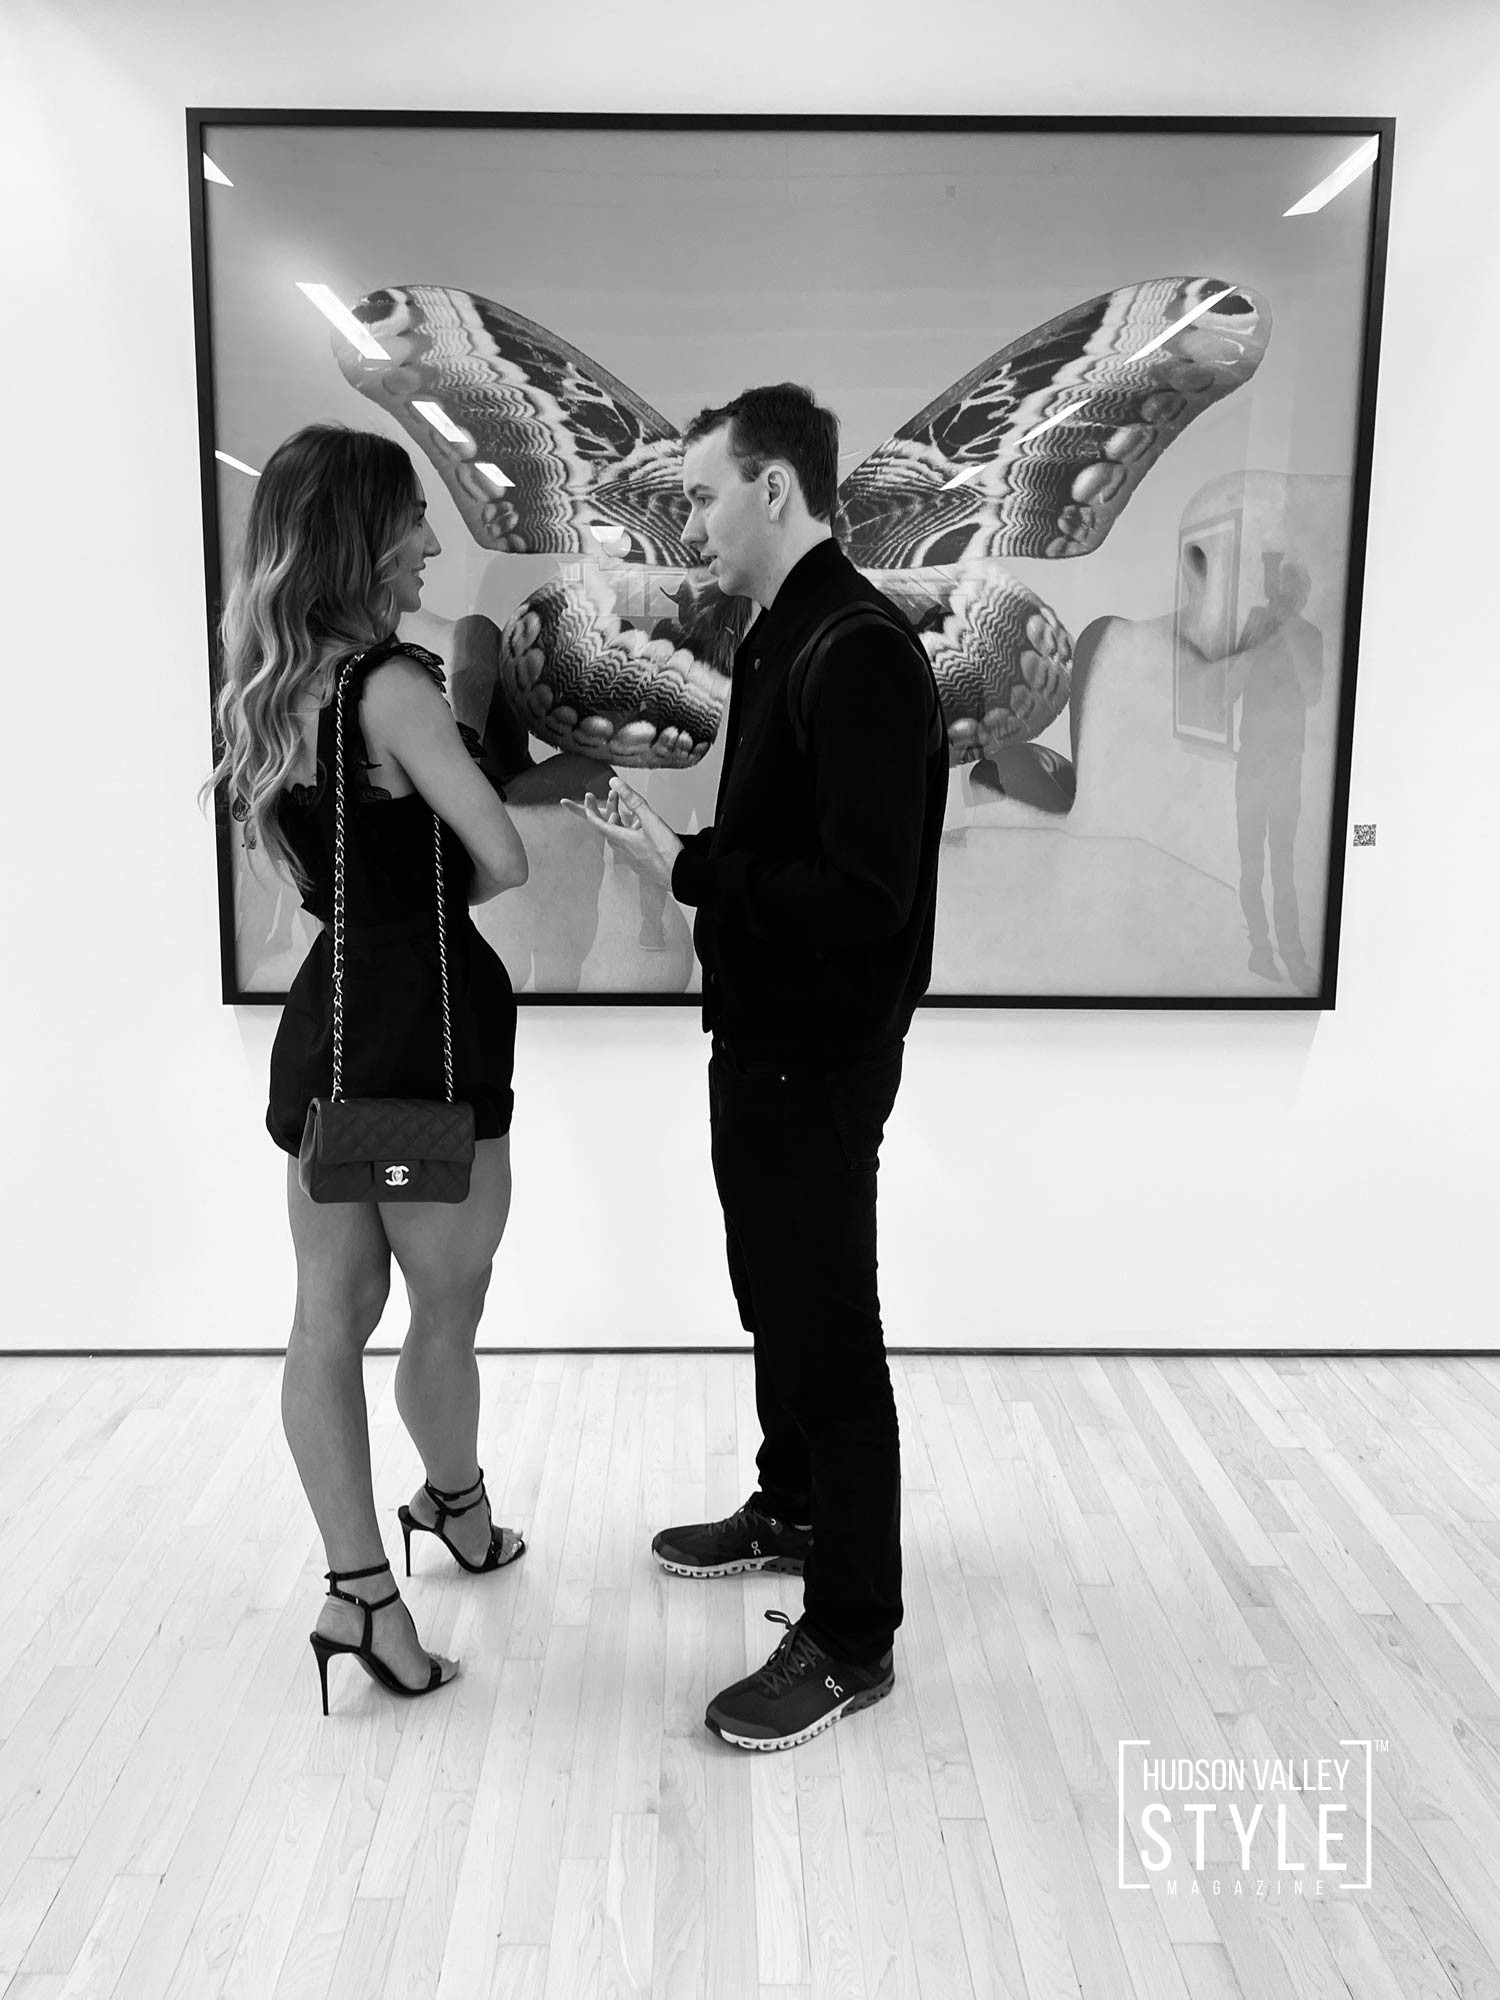 A Night With Photographer Tyler Shields – NYC Art Scene with Christine Stagnitta